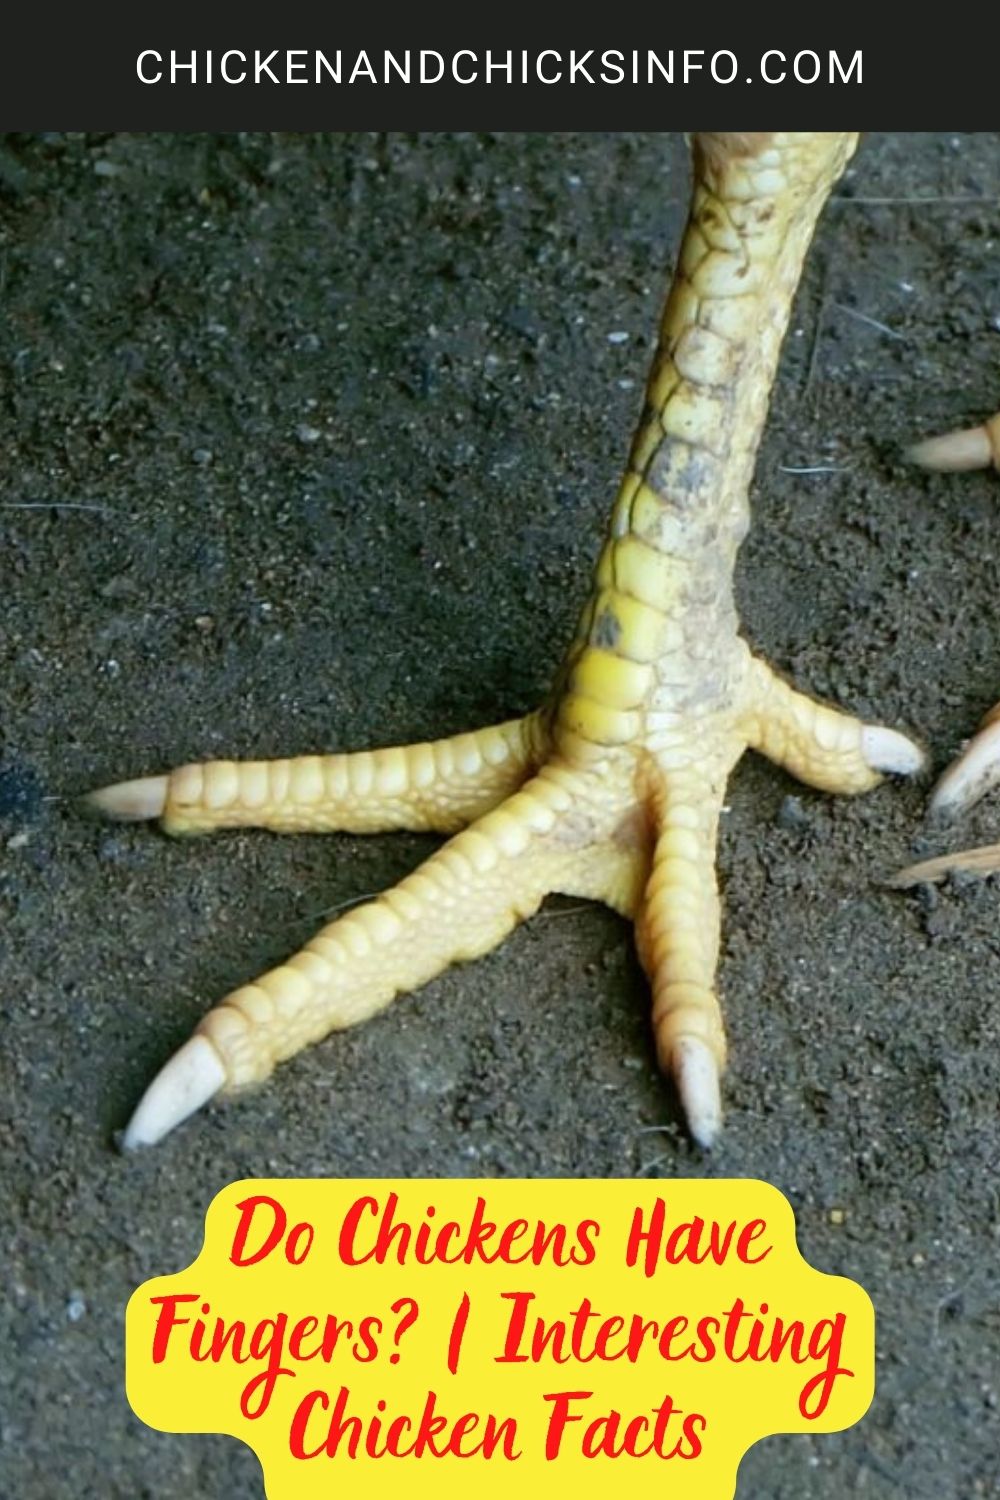 Do Chickens Have Fingers? | Interesting Chicken Facts poster.
